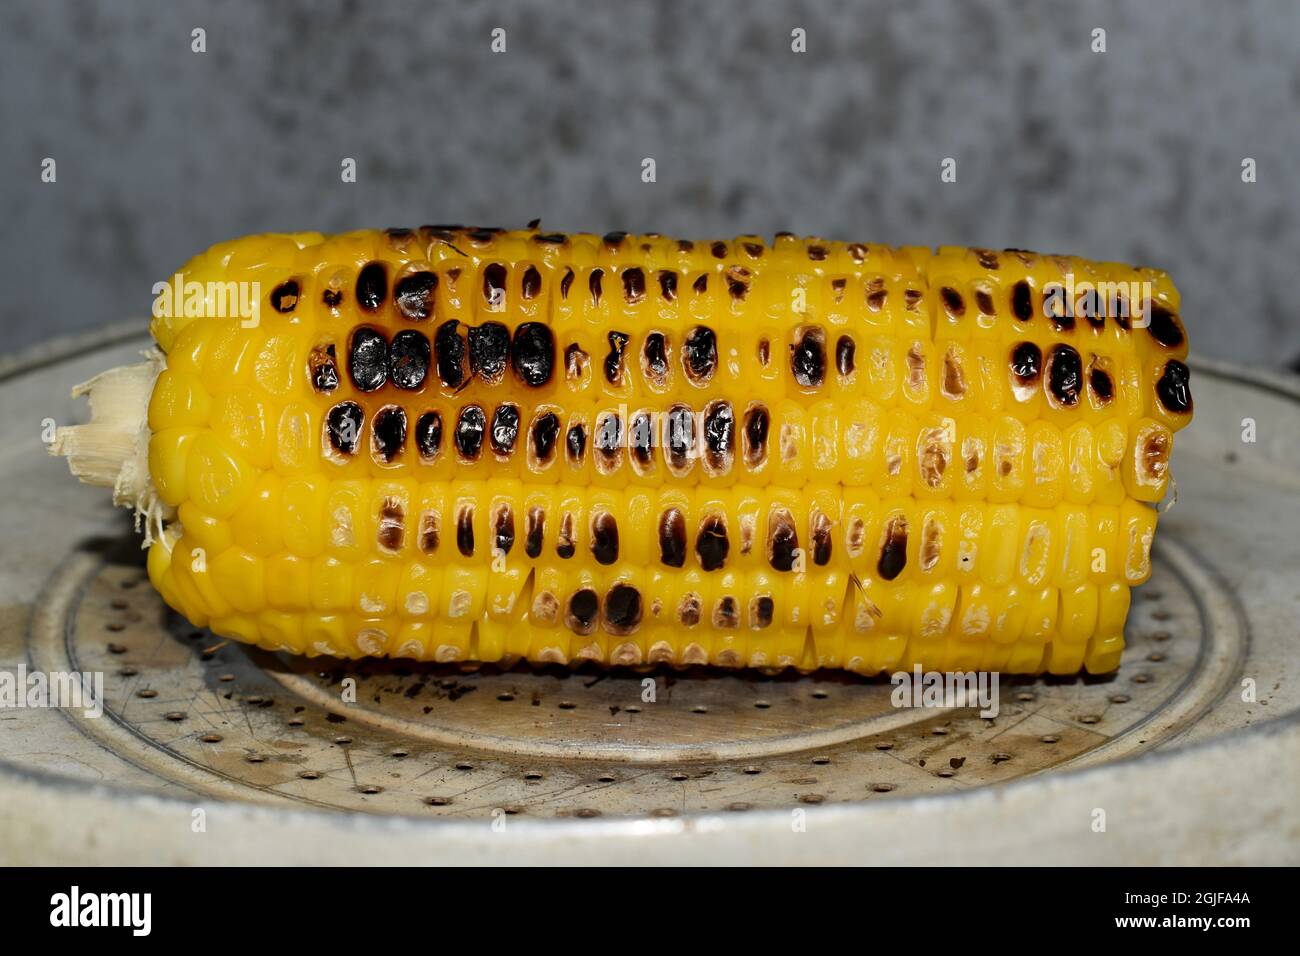 Myanmar or Burmese traditional street food, roasted corn. In medical point of view, it is carcinogenic. Stock Photo